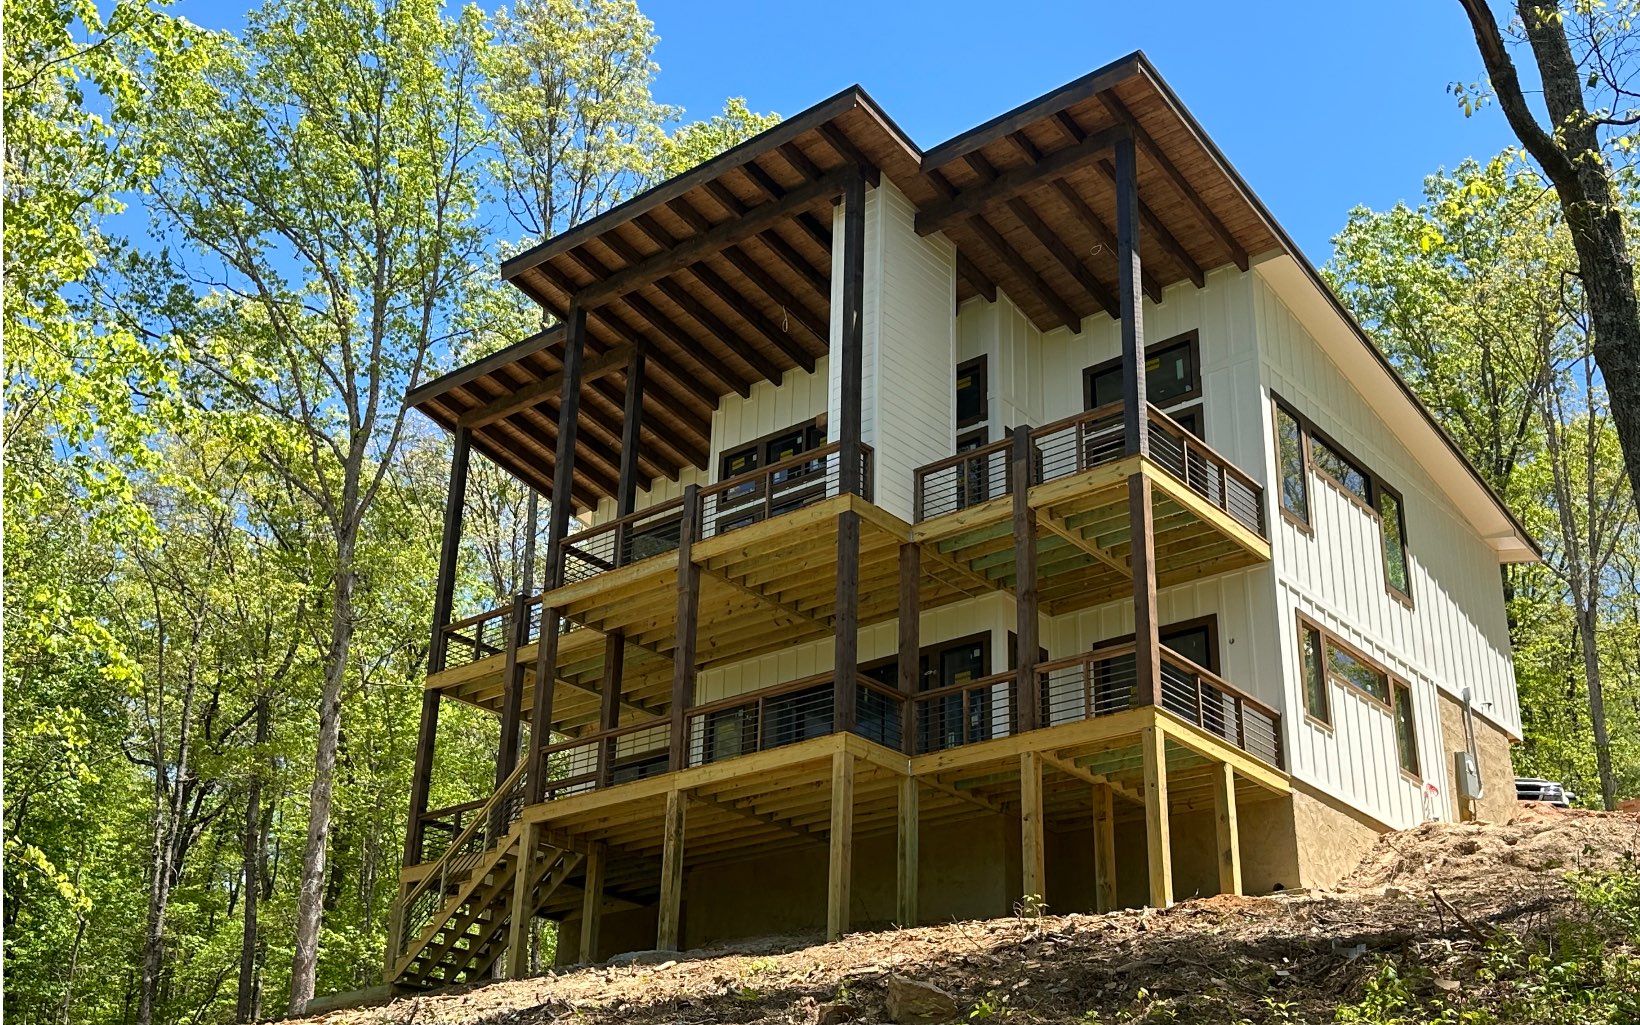 Mountain Modern creekfront cabin located within 5 min of Downtown Blue Ridge! Sleek, bold accents meeting modern rustic design creates the ultimate cabin for the most discerning buyer! Open great room w windows galore allow you to savor every sunrise, soaring ceilings, lavish stone fireplace, massive wood beam accents & the best in lighting & finishes! Combination of wood, stone & drywall add just the right amount of texture! The main level boasts 2 master bedrooms, a butler's pantry, tile walk-in shower & great closet space. Main level deck will feel like part of the living space as the two combine giving it the most adequate entertainment area alongside the outdoor fireplace. The terrace level features stained concrete flooring, wet bar, rec/bonus area as well as 2 more bedrooms & baths. Again, the outdoors will be incorporated in to the space allowing you the ability to enjoy your useable creekfront acreage! POWERLINES TO BE REMOVED so there's nothing blocking your view of the creek or invading your space. Easy access, private lot, SHORT TERM RENTALS ARE ALLOWED & HIGH SPEED INTERNET AVAILABLE! Completion date projected for July 31, 2023. Flooring to be installed and walls to be painted the week of 5/8.